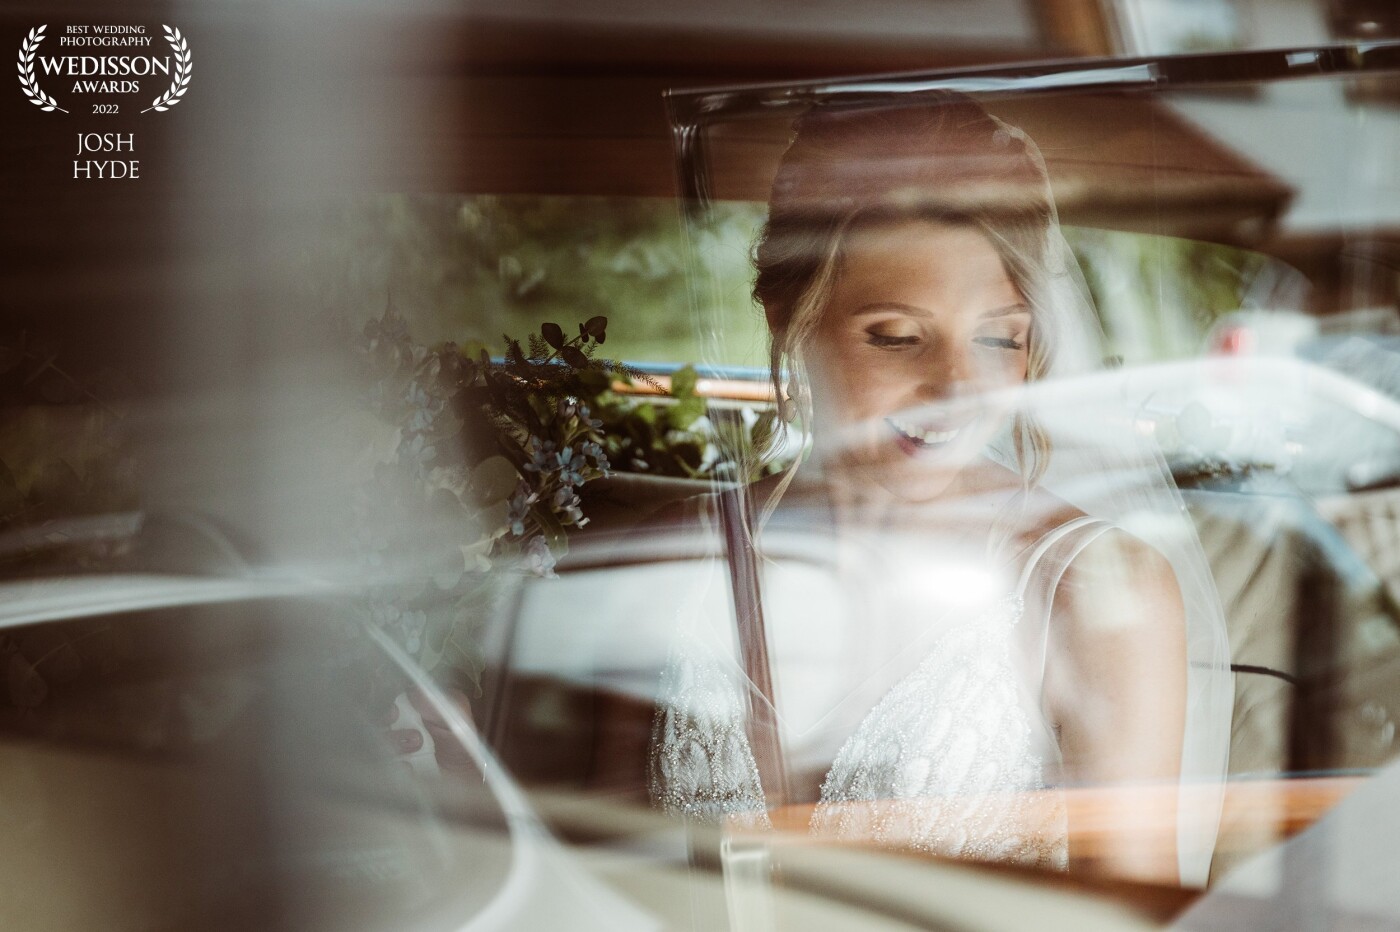 Sometimes the timing just hits just right! Reflections can be tricky to shoot through but with the correct lighting you can get some lovely candid shots. This one is the arrival of the Bride getting ready to meet her Husband to be!